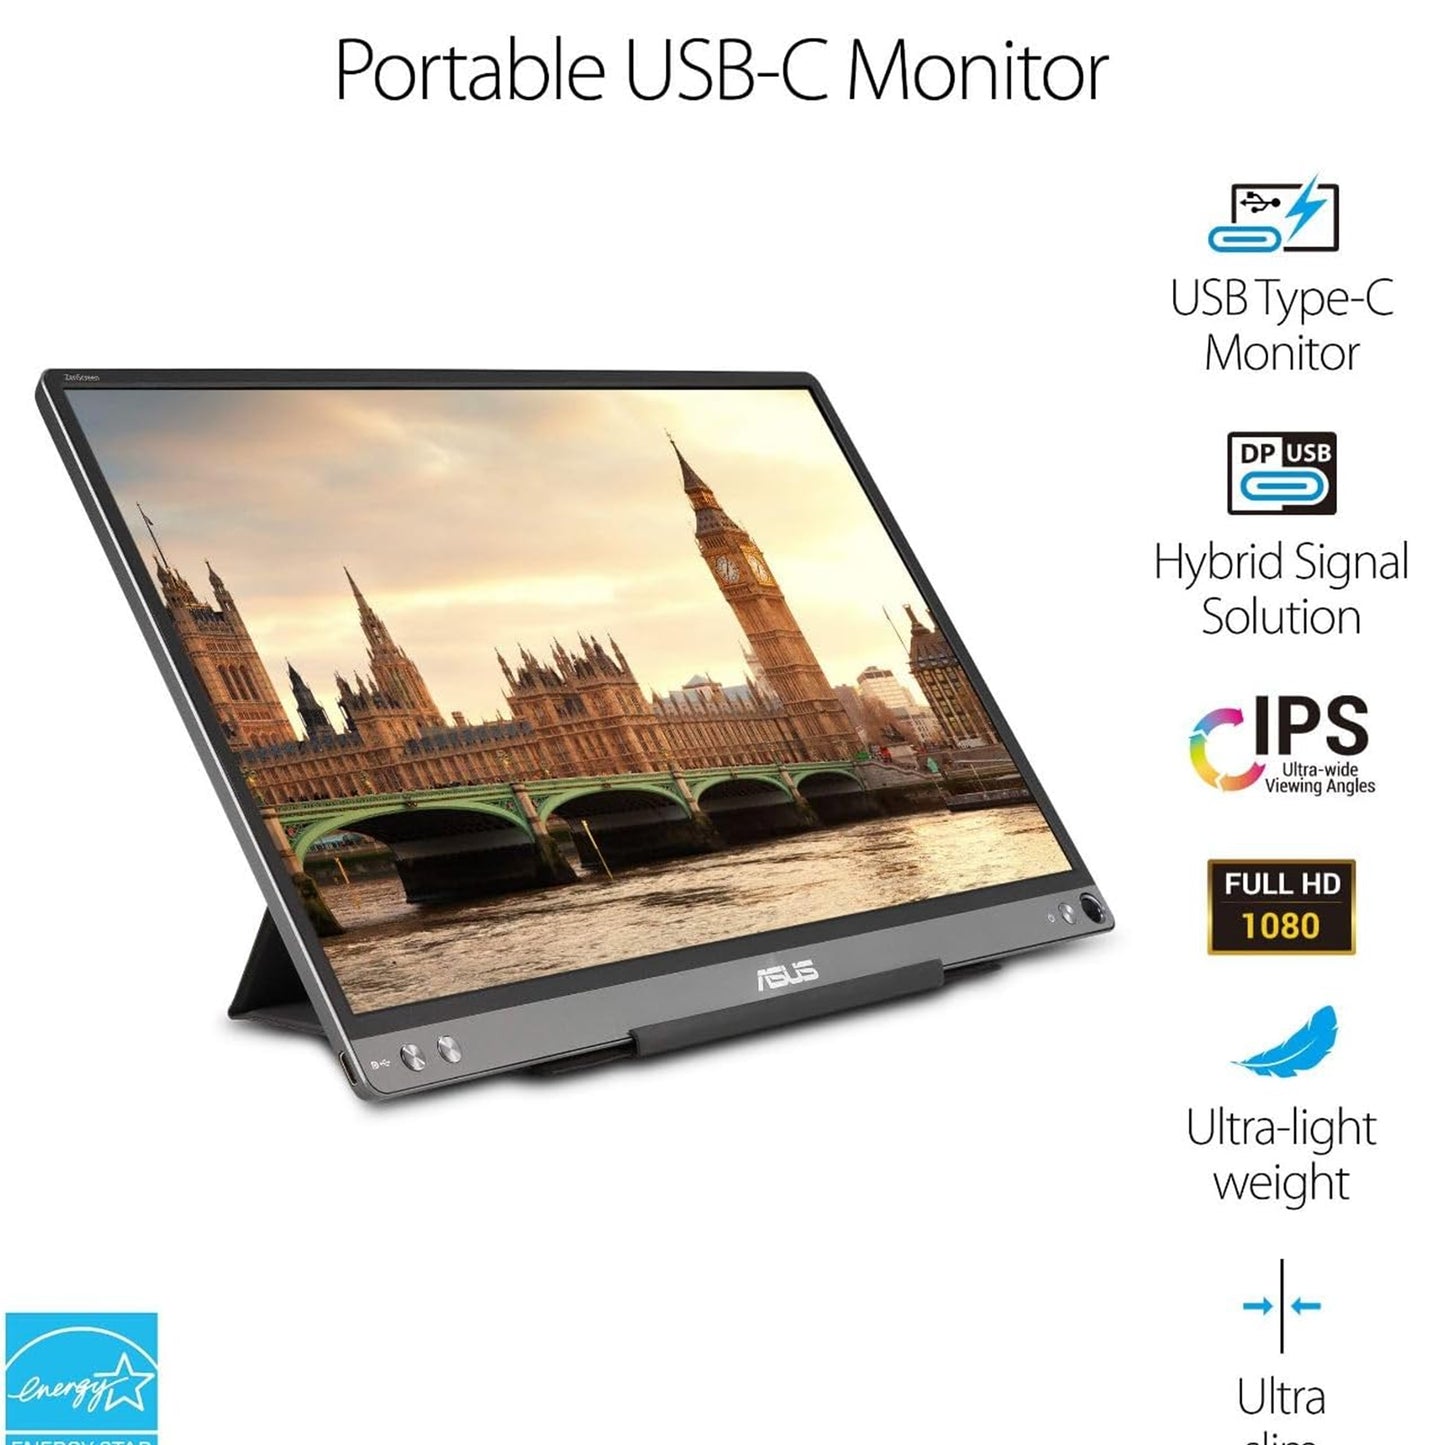 ASUS ZenScreen 15.6” 1080P Portable USB Monitor (MB16ACE) - Full HD (1920 x 1080), IPS, USB Type-C, Eye Care, Anti-Glare Surface, Lite Smart Case, External screen for laptop